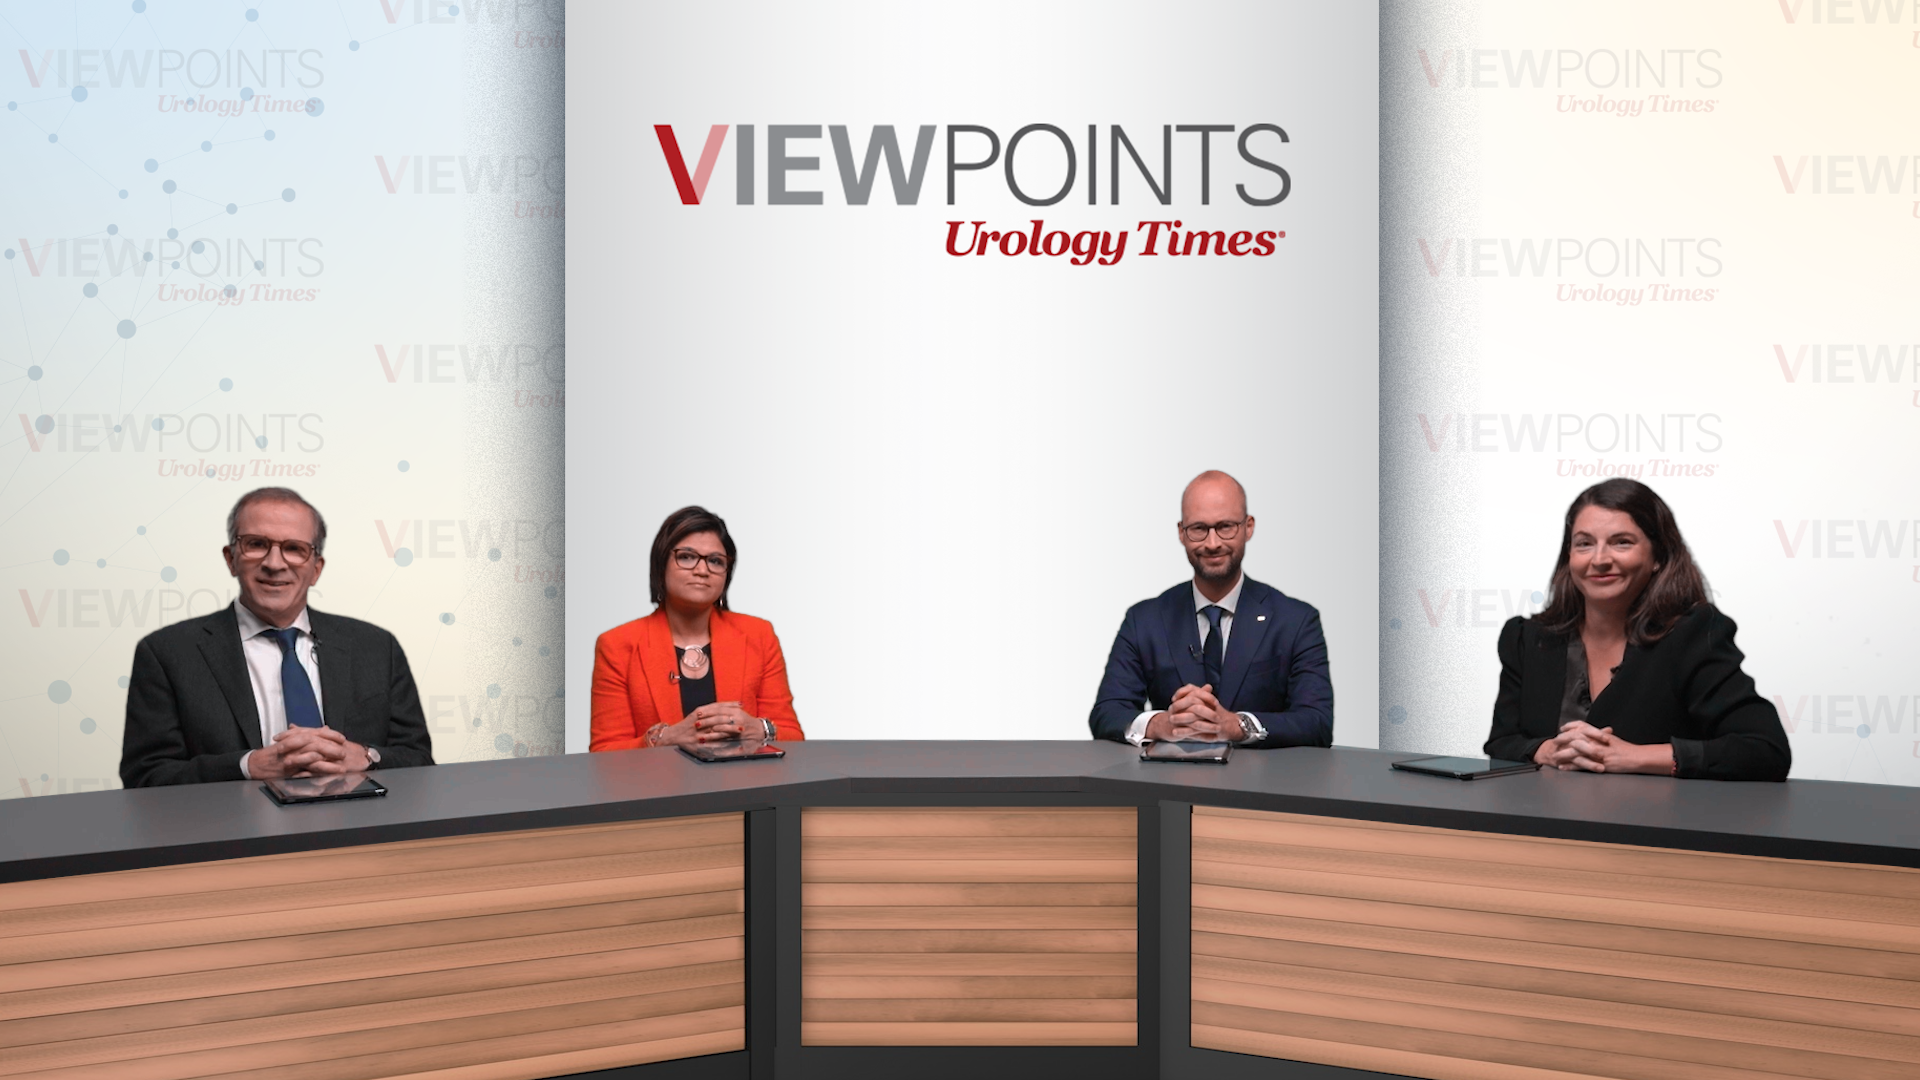 A panel of 5 experts on bladder cancer